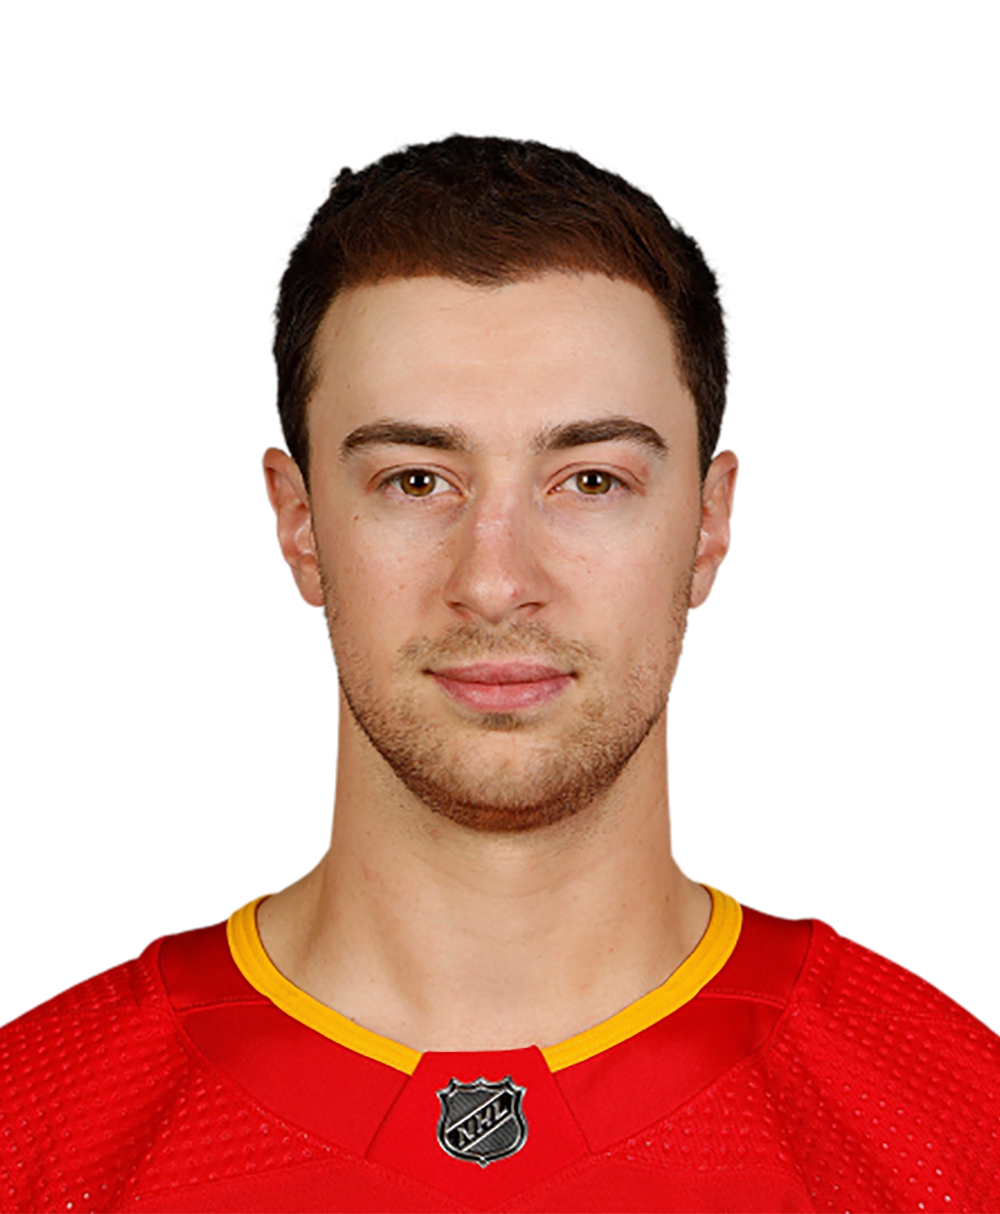 Mangiapane paces Flames to season-opening 5-3 win over Jets - The